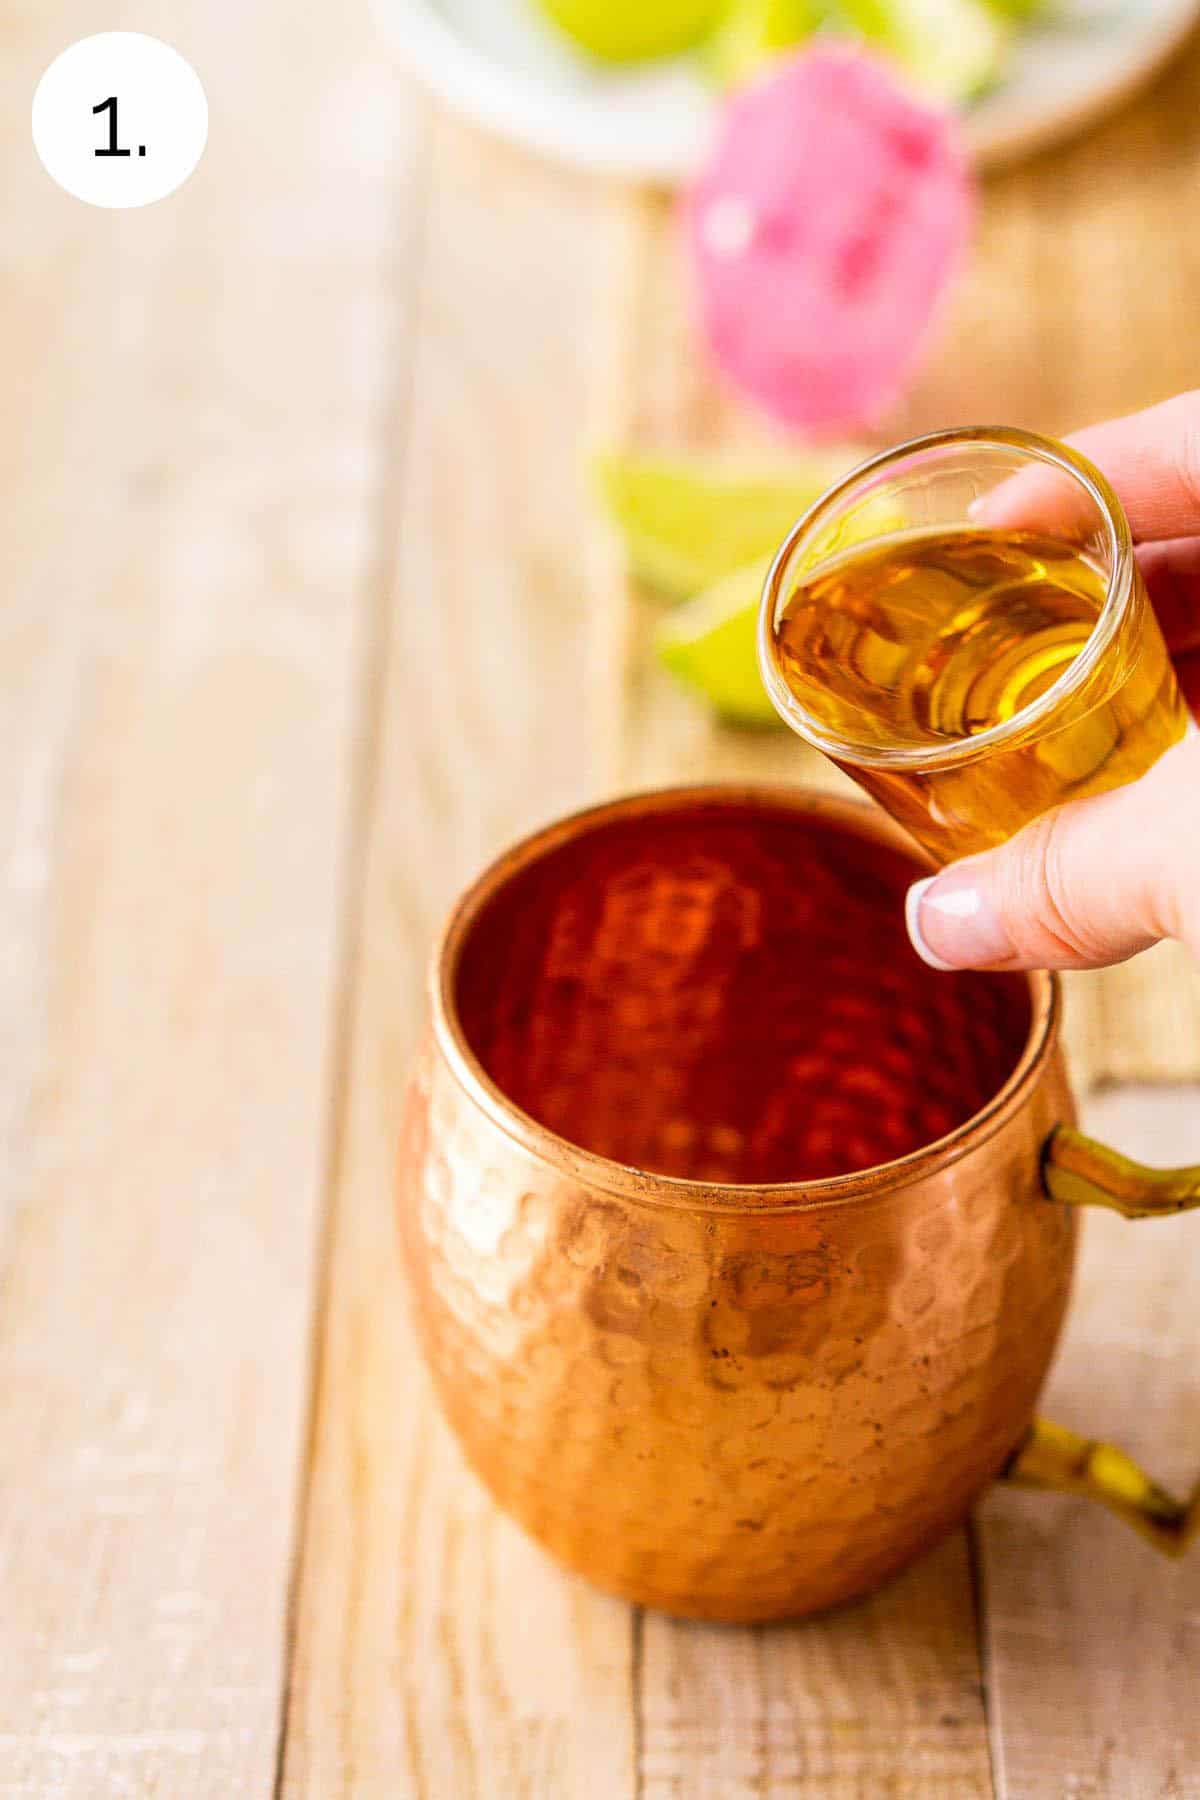 A hand pouring a shot of Jamaican rum into a copper mug on a cream-colored wooden board.